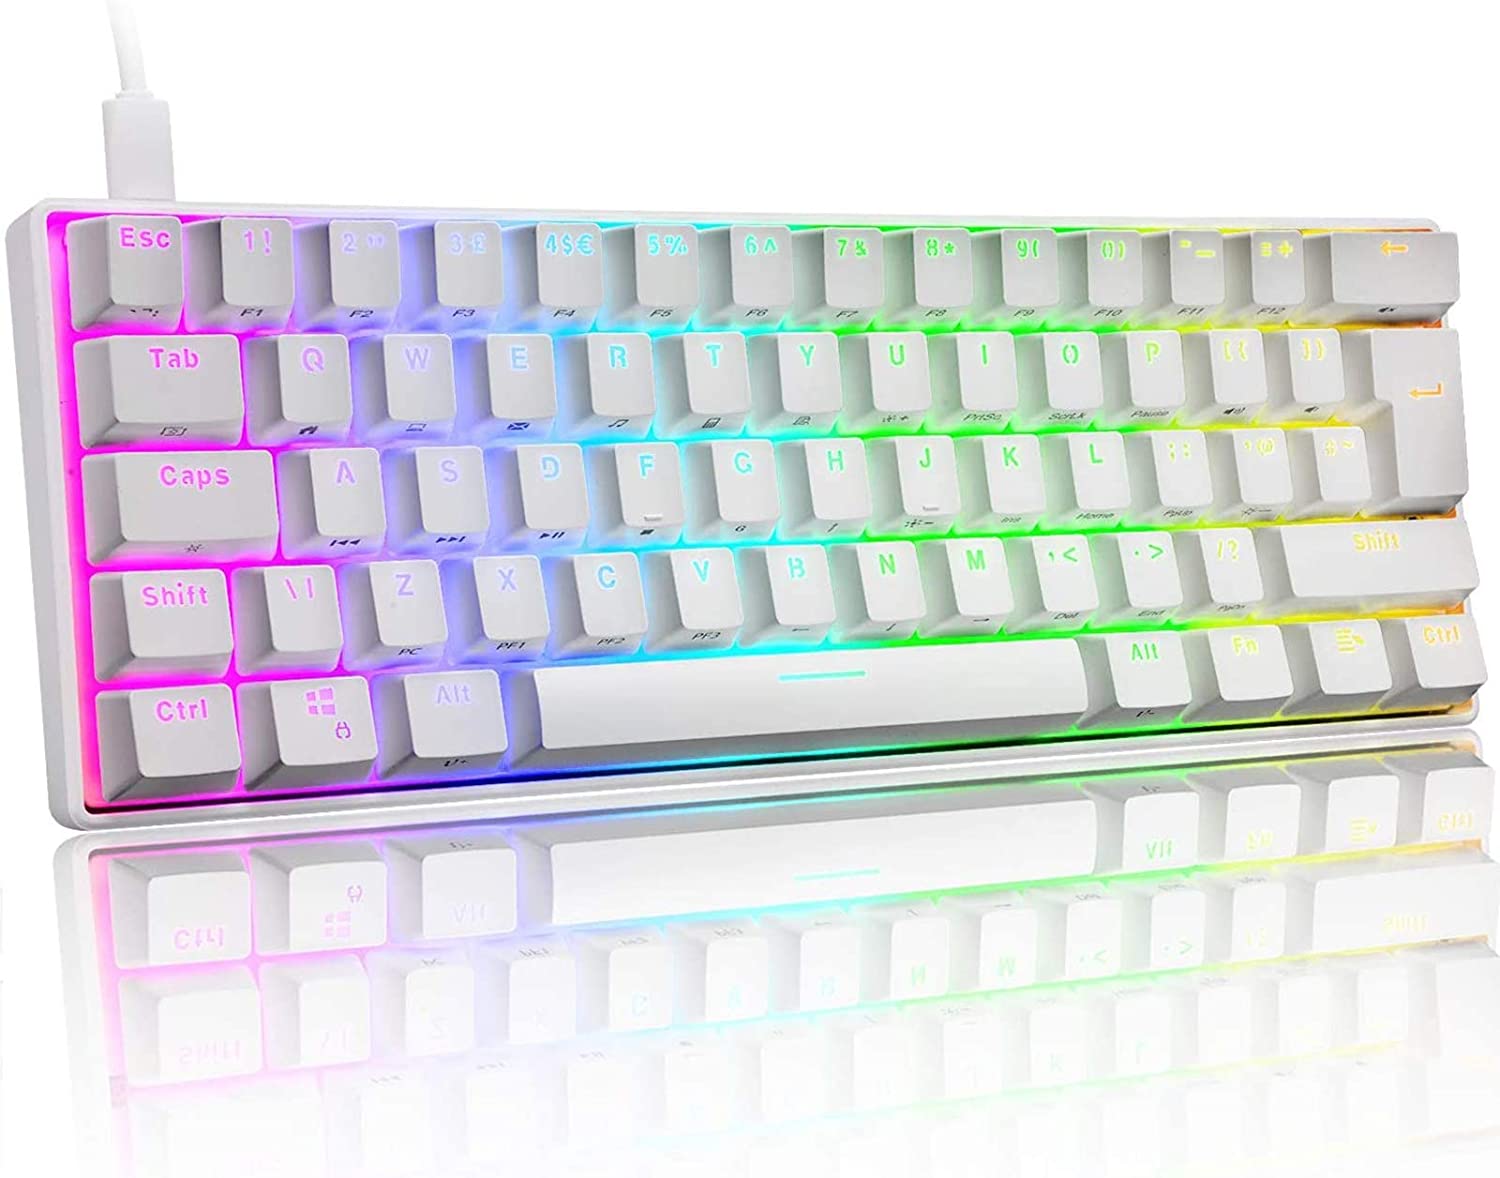 Best Budget Keyboard for Gaming in 2023 Paul Sera